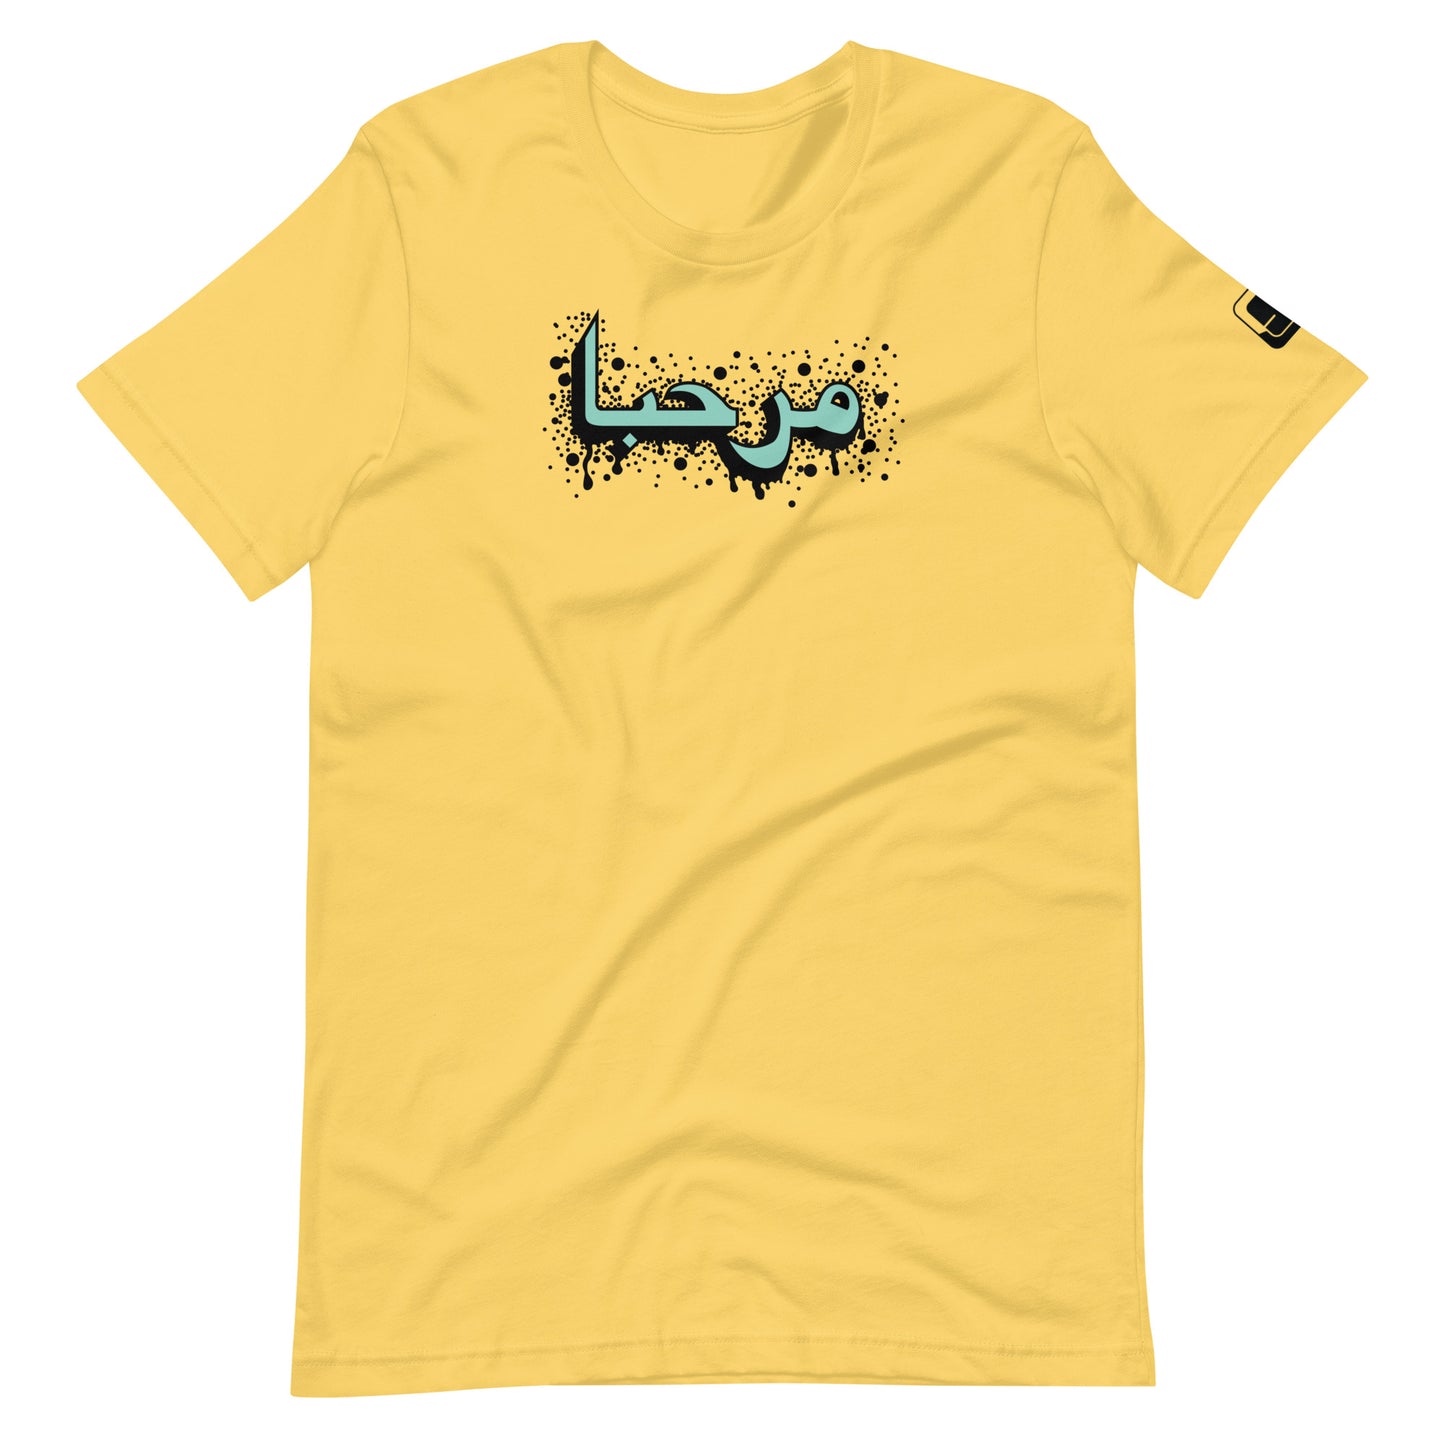 Lemon yellow t-shirt featuring central turquoise Arabic calligraphy with black shadow and scattered ink dots, accompanied by a small black logo patch on the sleeve, displayed against a white background.